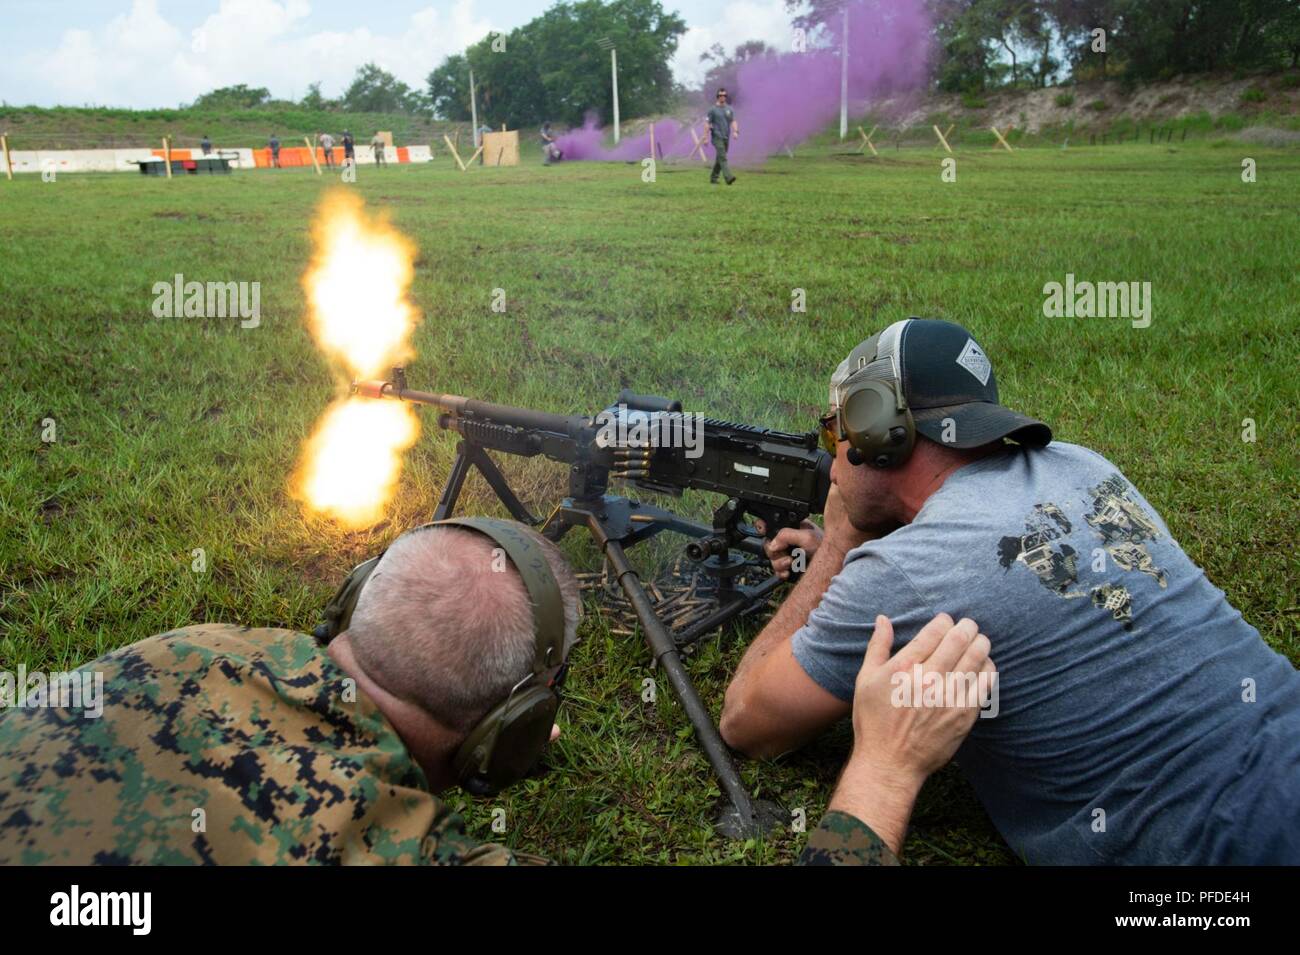 Military and civilian personnel, along with local law enforcement, fire blanks from an M240B machine gun during the U.S. Special Operations Command D-Day Memorial Shoot on MacDill Air Force Base., Fla., June 1, 2018. USSOCOM hosted the event to honor the brave men that stormed the beach on D-Day, while also building comradery and unit cohesion through shared physical exertion. ( Stock Photo